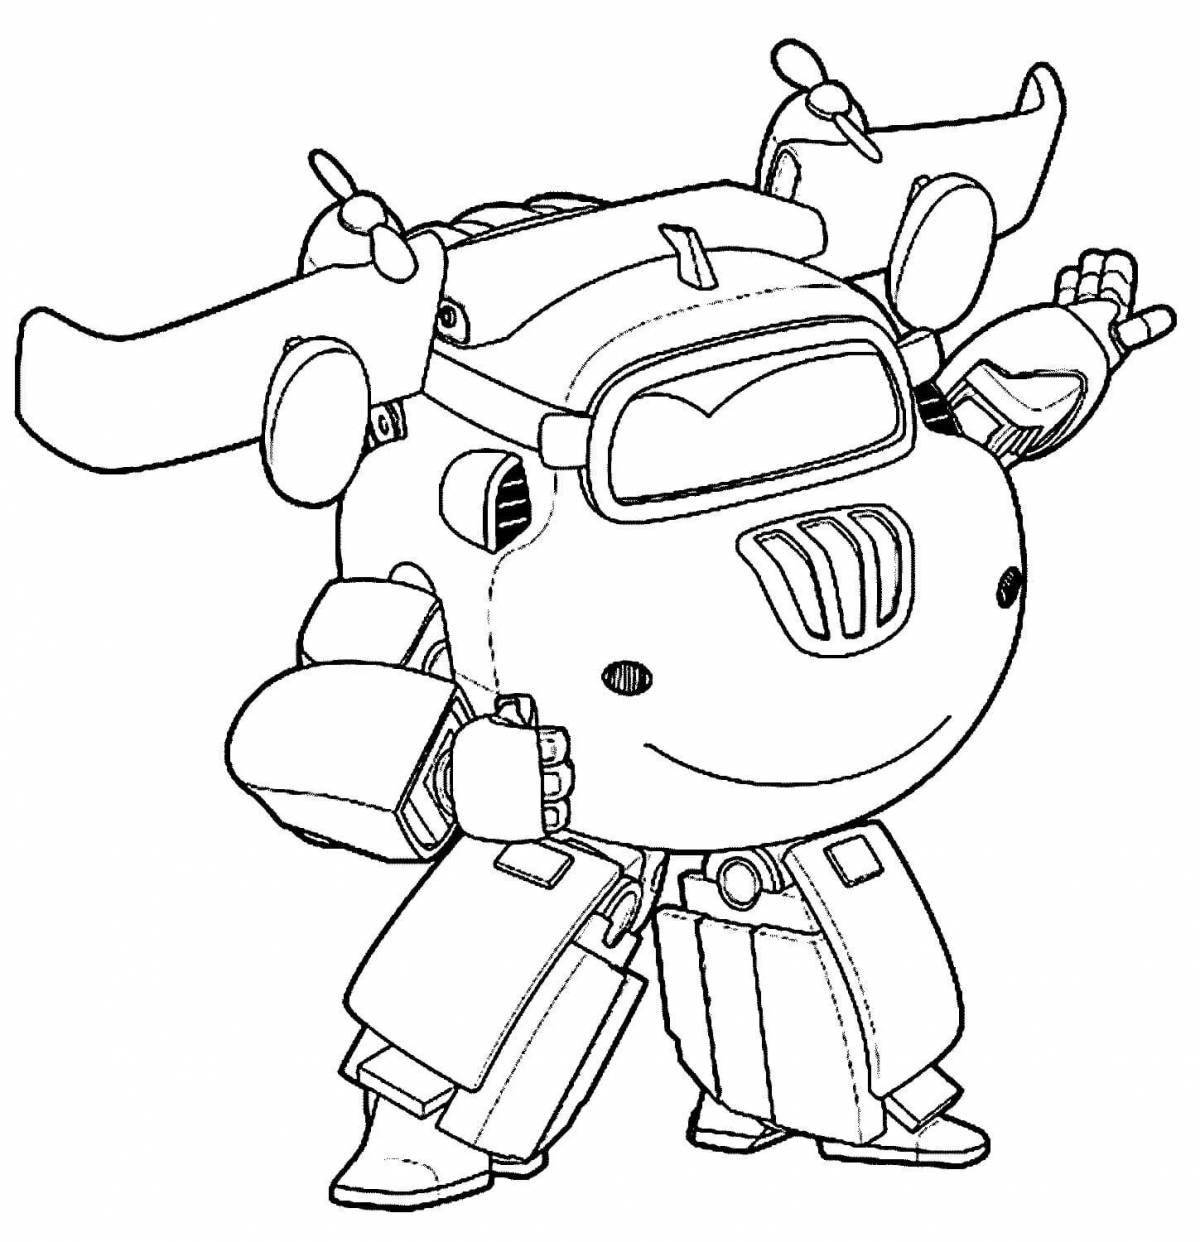 Fabulous donnie super wings coloring page